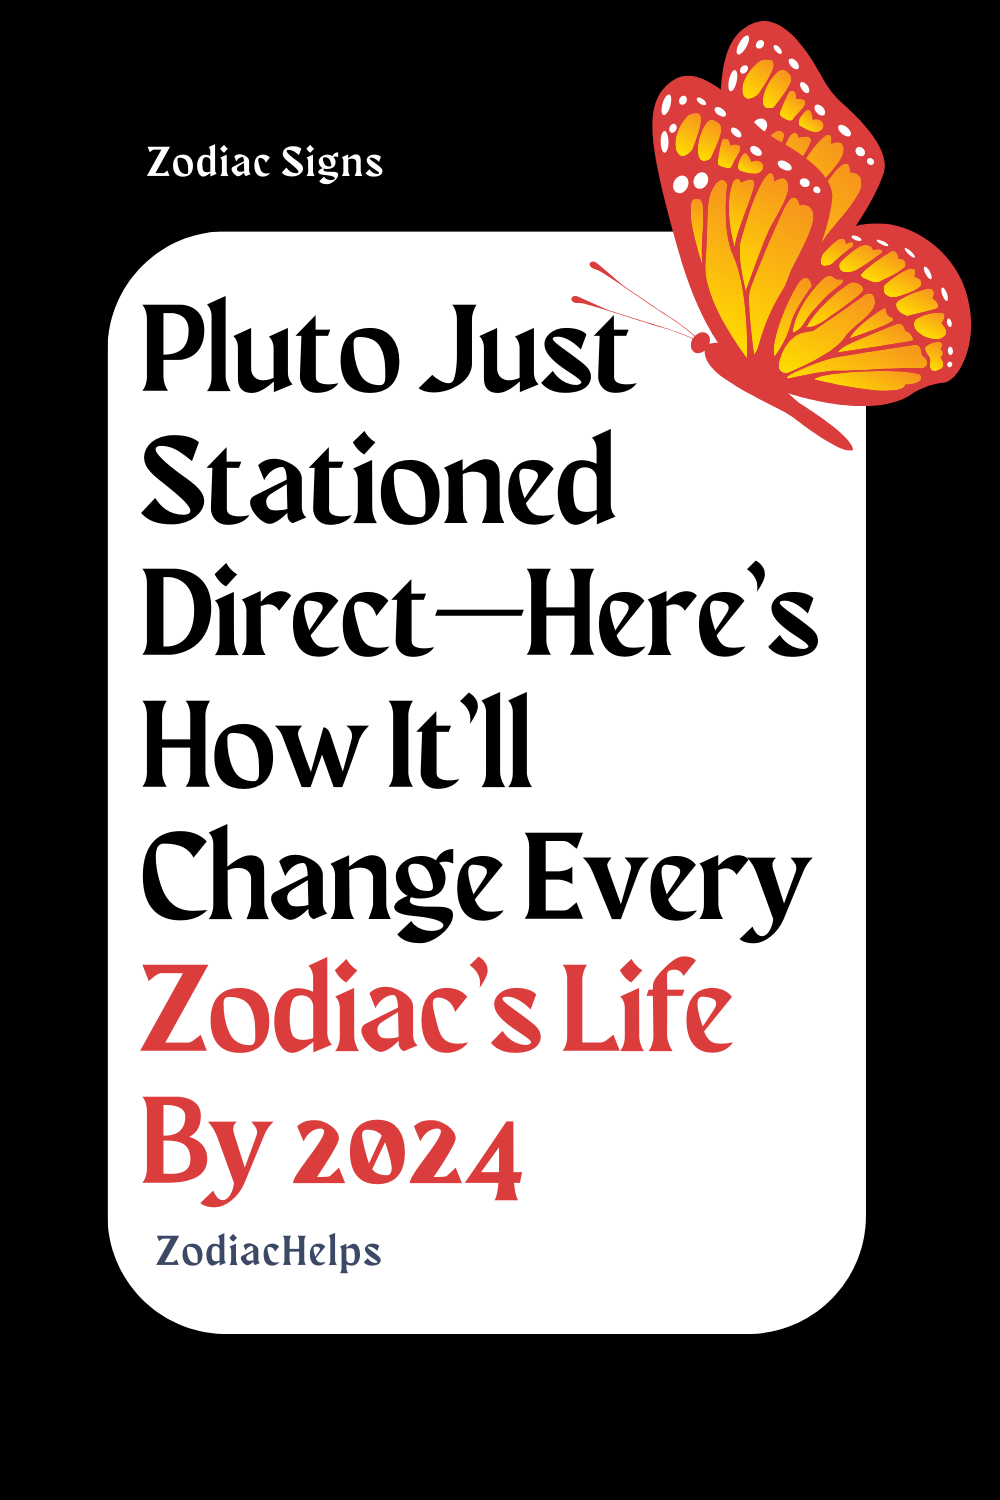 Pluto Just Stationed Direct—Here’s How It’ll Change Every Zodiac’s Life By 2024